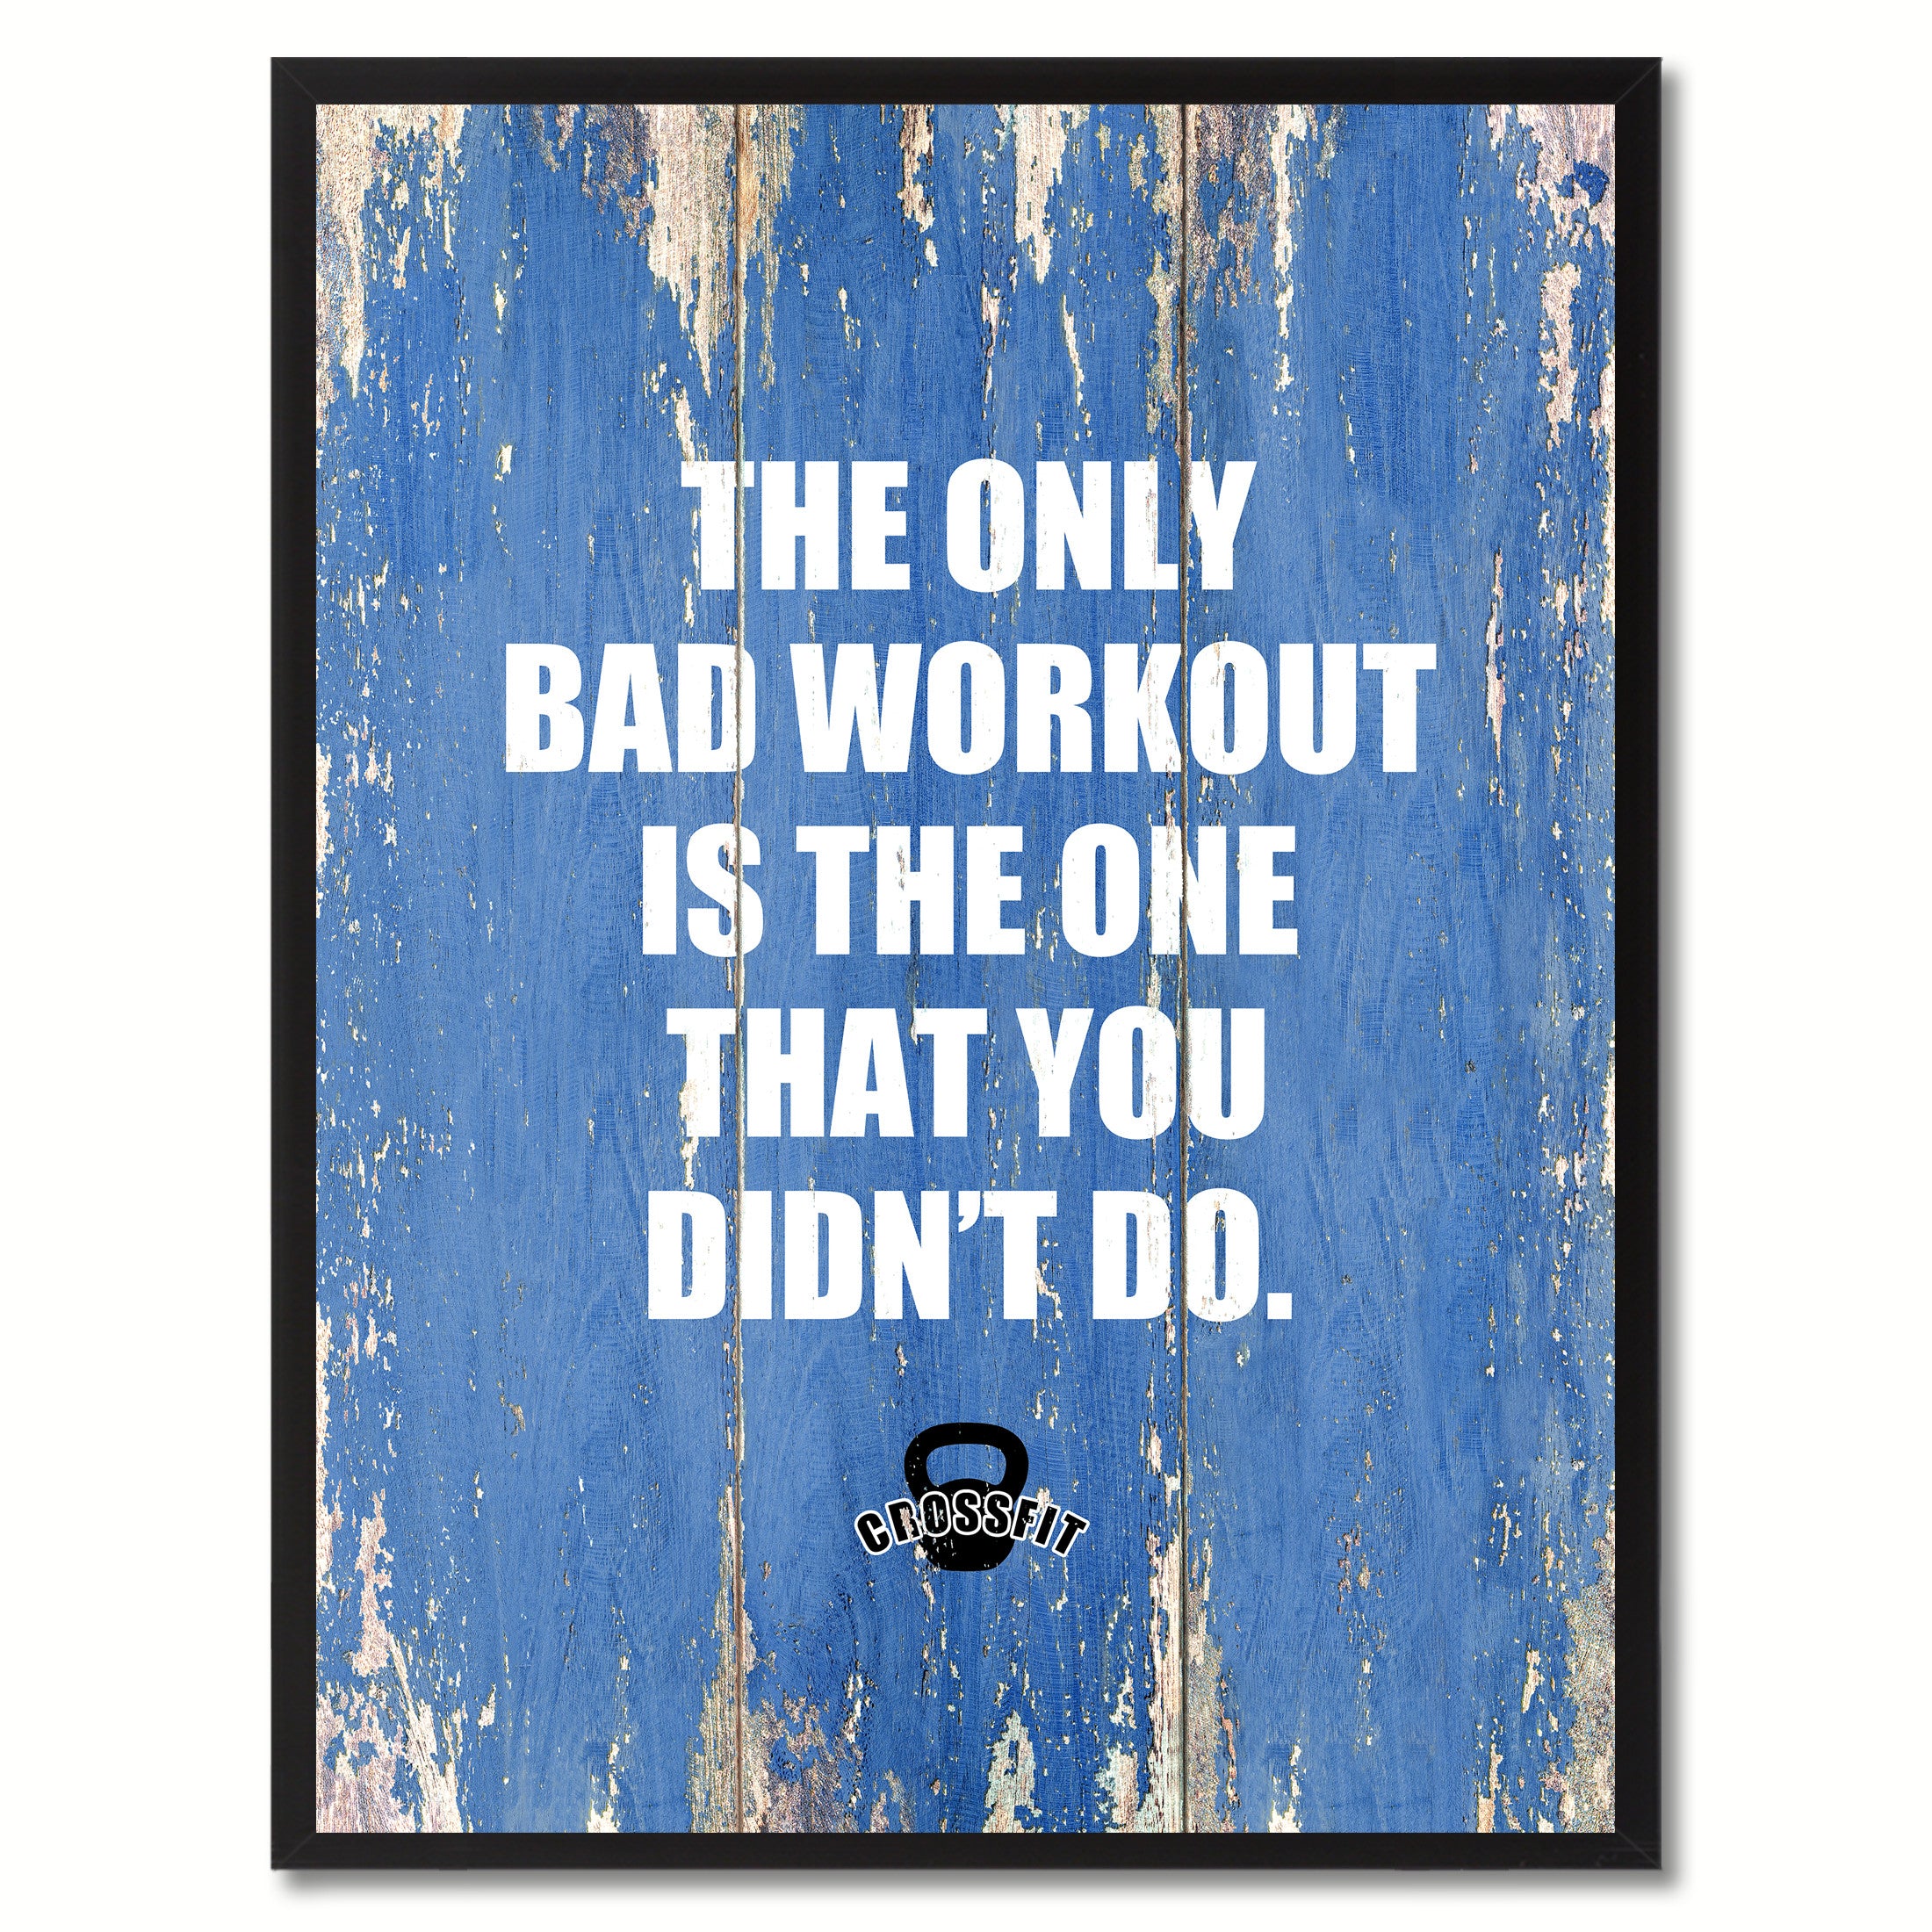 The Only Bad Workout Is The One That You Didn't Do Saying Canvas Print, Black Picture Frame Home Decor Wall Art Gifts